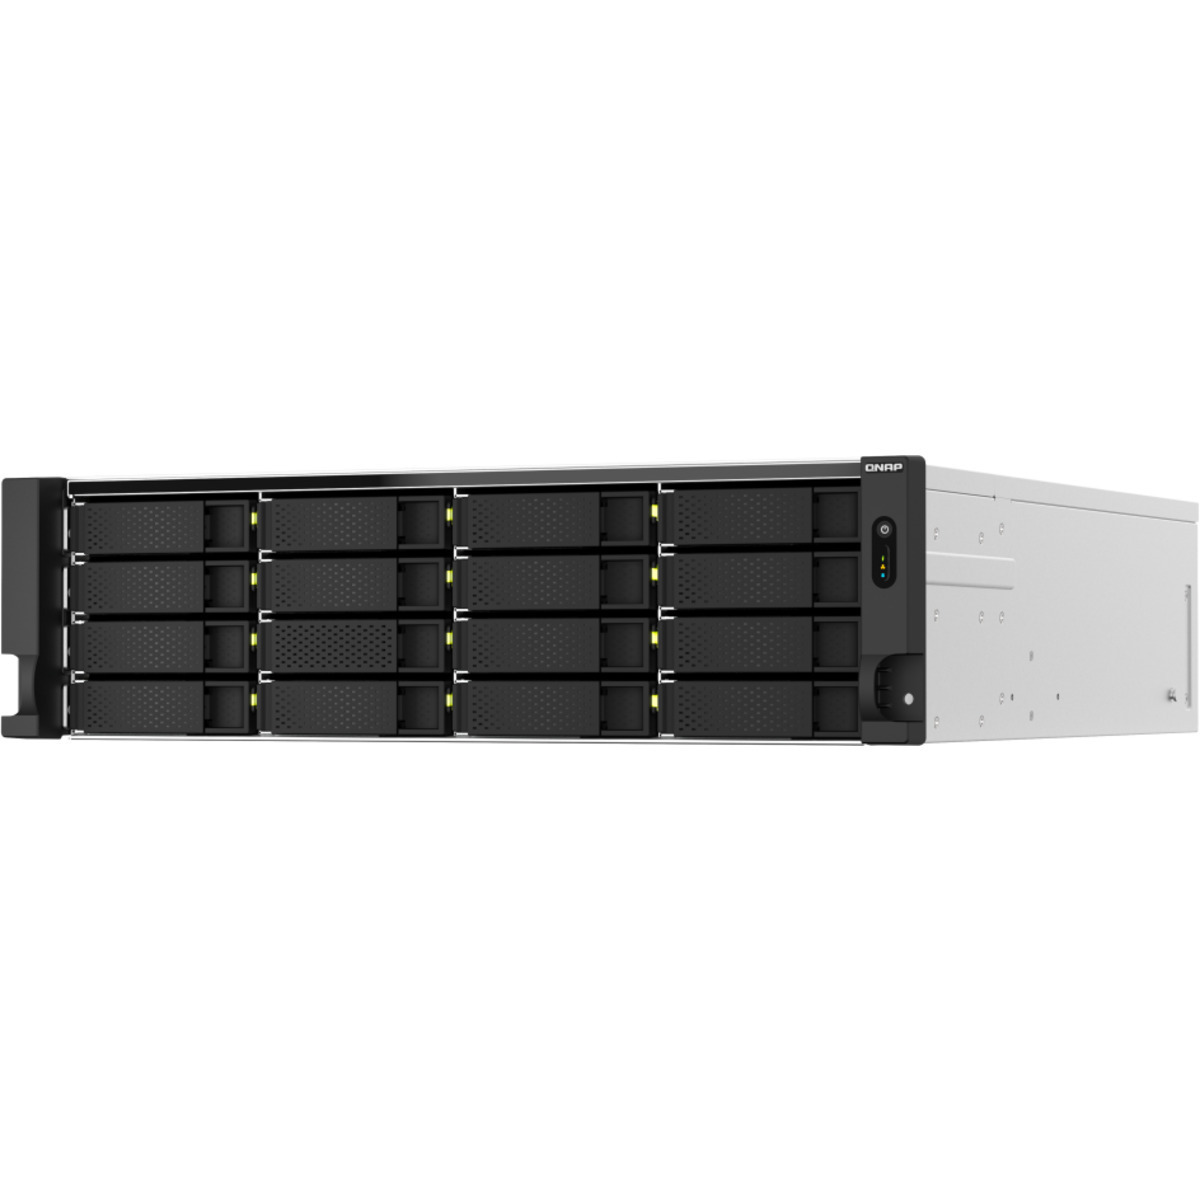 QNAP TS-h2287XU-RP E-2336 QuTS hero Edition 44tb 16+6-Bay RackMount Large Business / Enterprise NAS - Network Attached Storage Device 11x4tb Samsung 870 EVO MZ-77E4T0BAM 2.5 560/530MB/s SATA 6Gb/s SSD CONSUMER Class Drives Installed - Burn-In Tested - ON SALE TS-h2287XU-RP E-2336 QuTS hero Edition